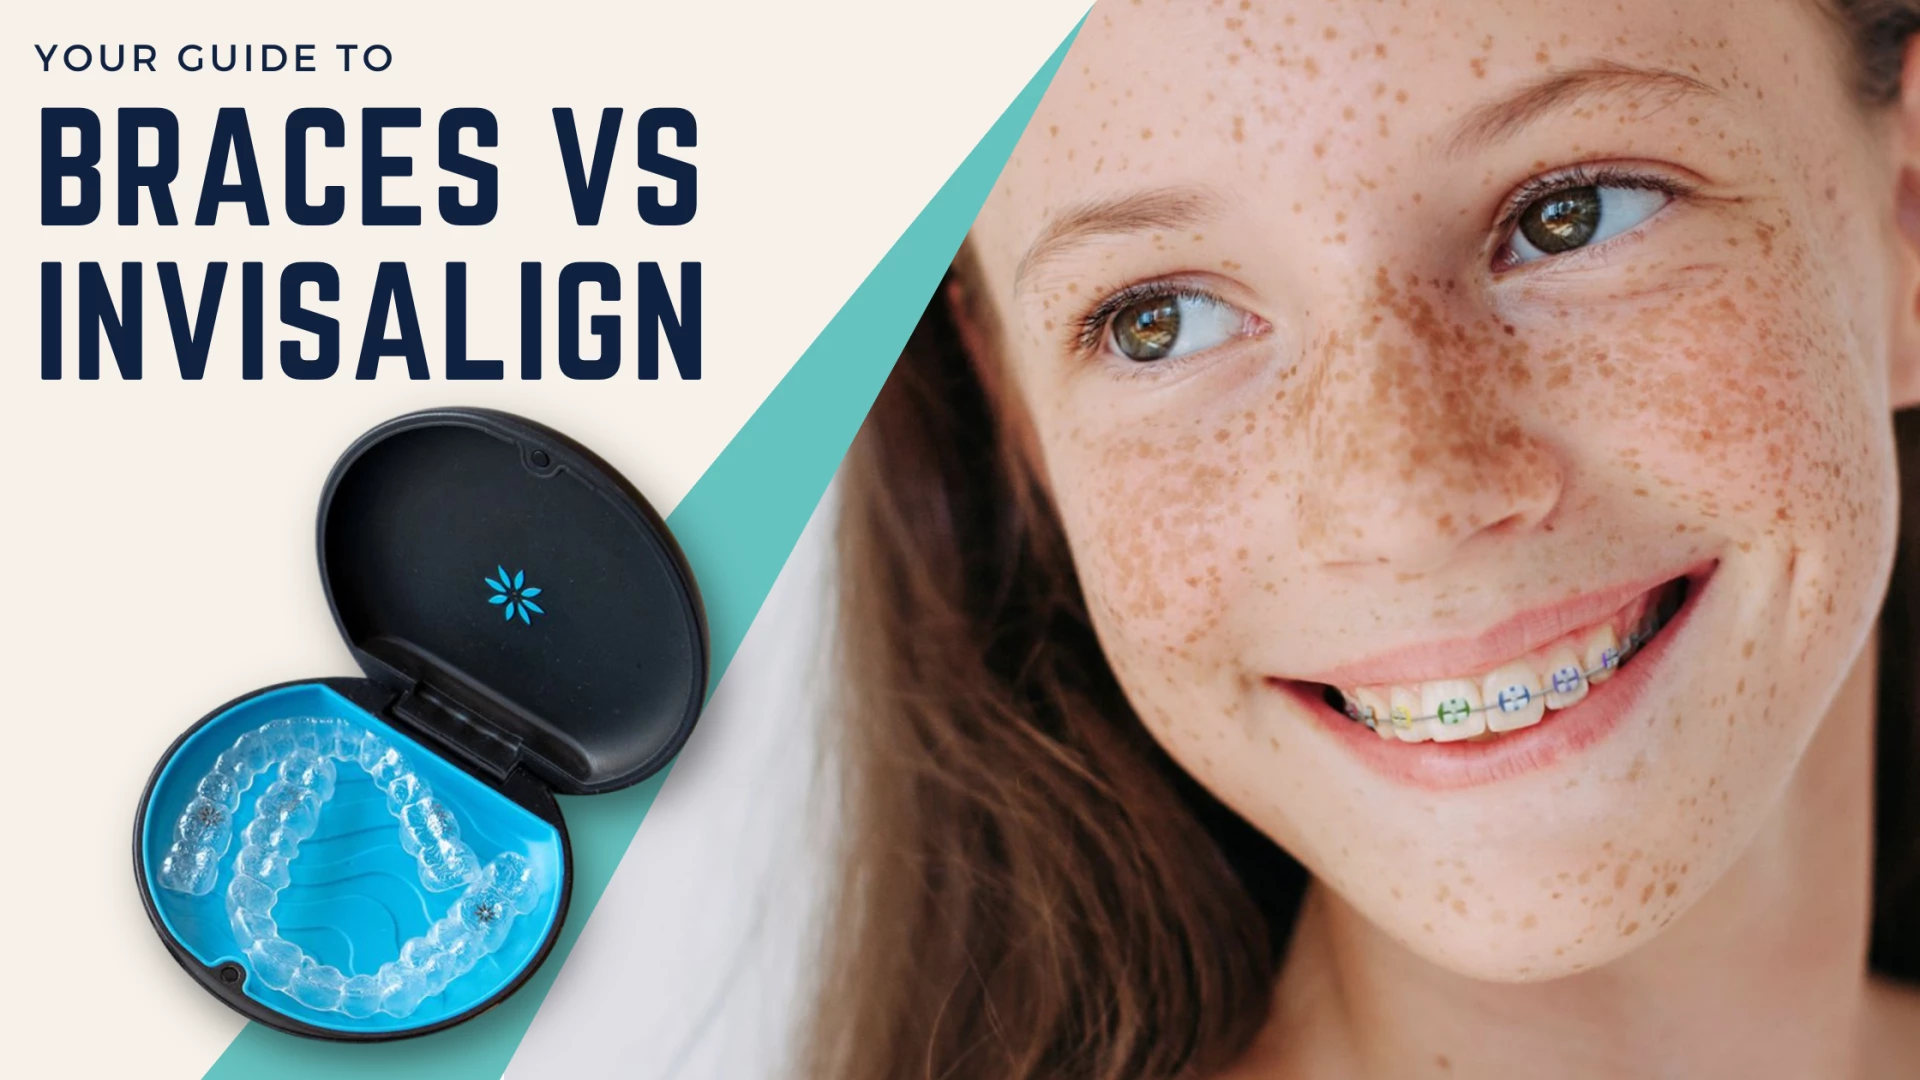 Invisalign Vs Braces - Which Is The Best Orthodontic Treatment For